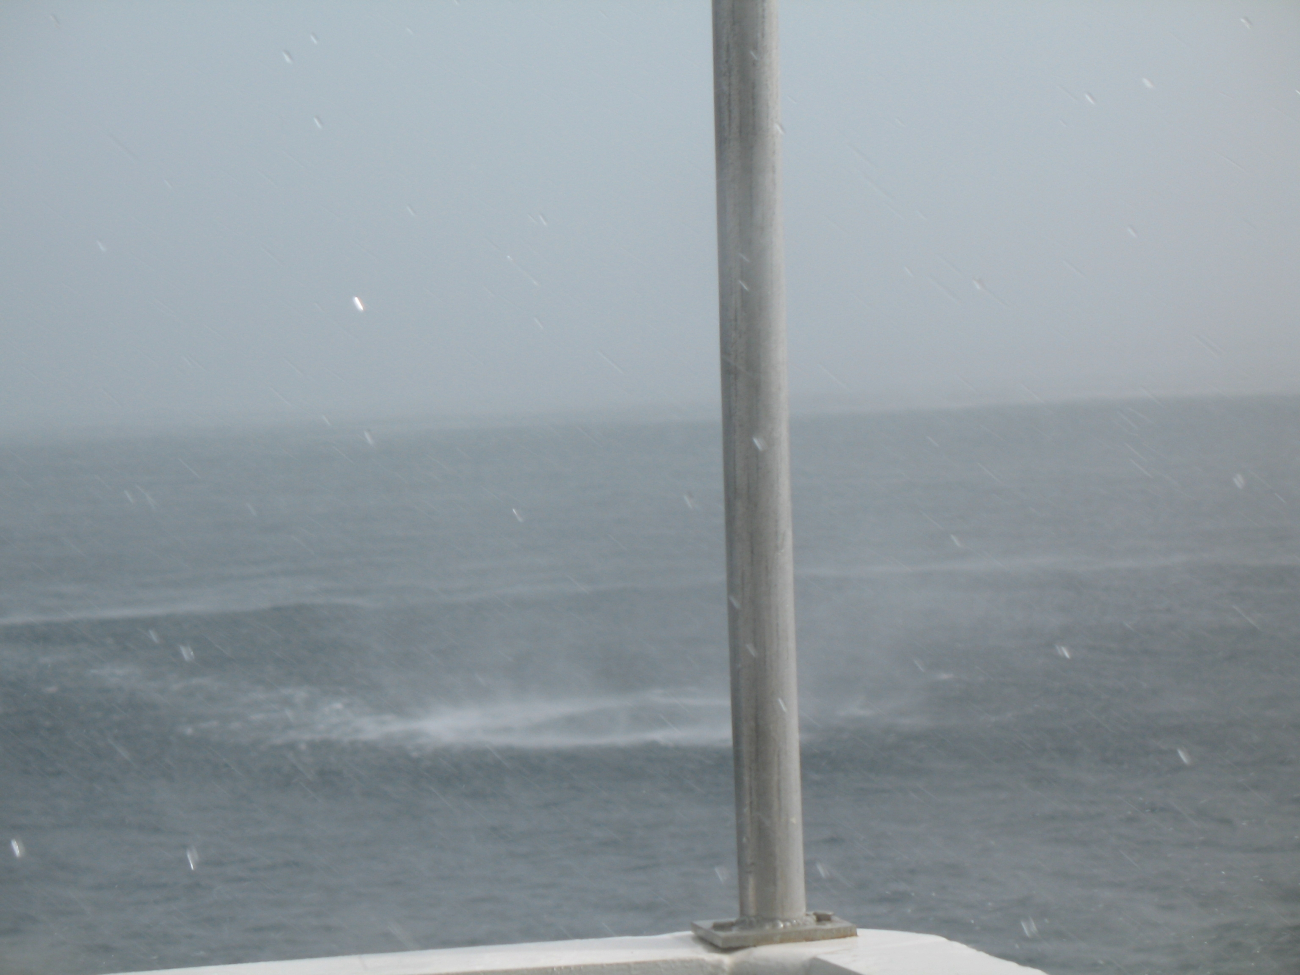 Waterspout sequence as the spray from a waterspout approaches the NOAA ShipGORDON GUNTER which is constrained in its ability tomaneuver as the recently launched TAO buoy is not yet anchored and is stillsecured by its mooring line to the ship